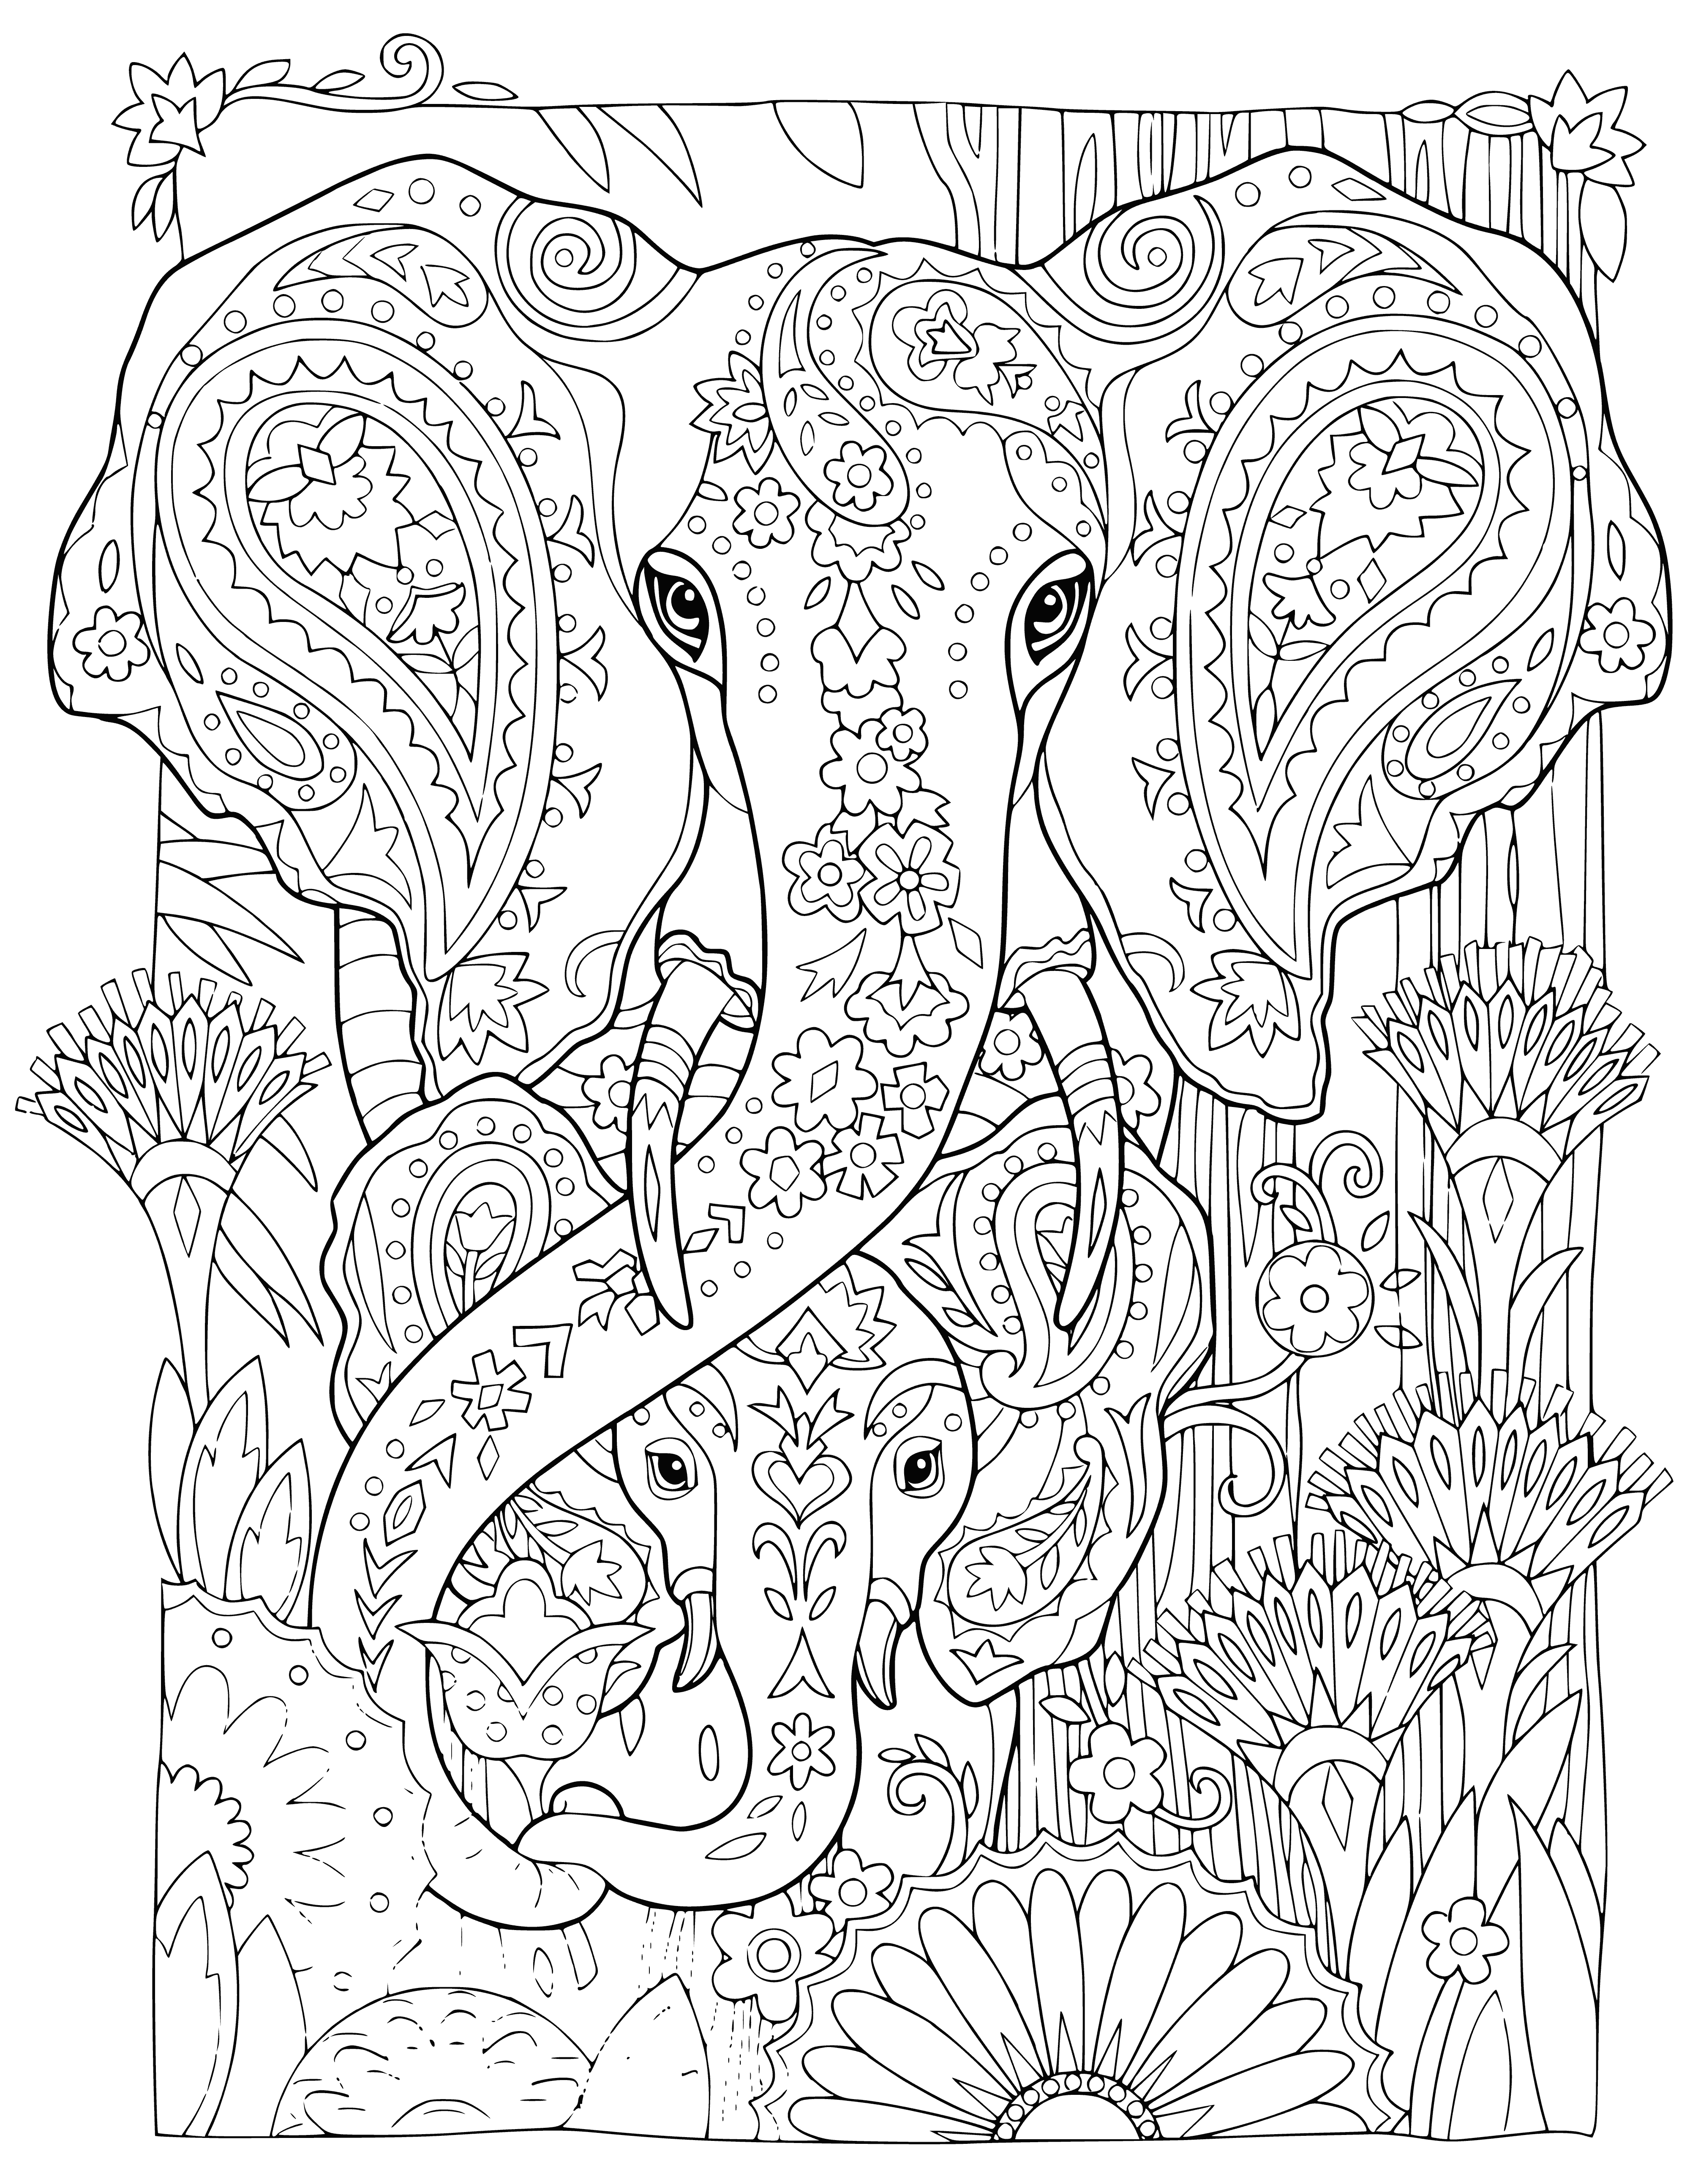 coloring page: A huge grey elephant & a tiny white one stand on green grass in this coloring page.